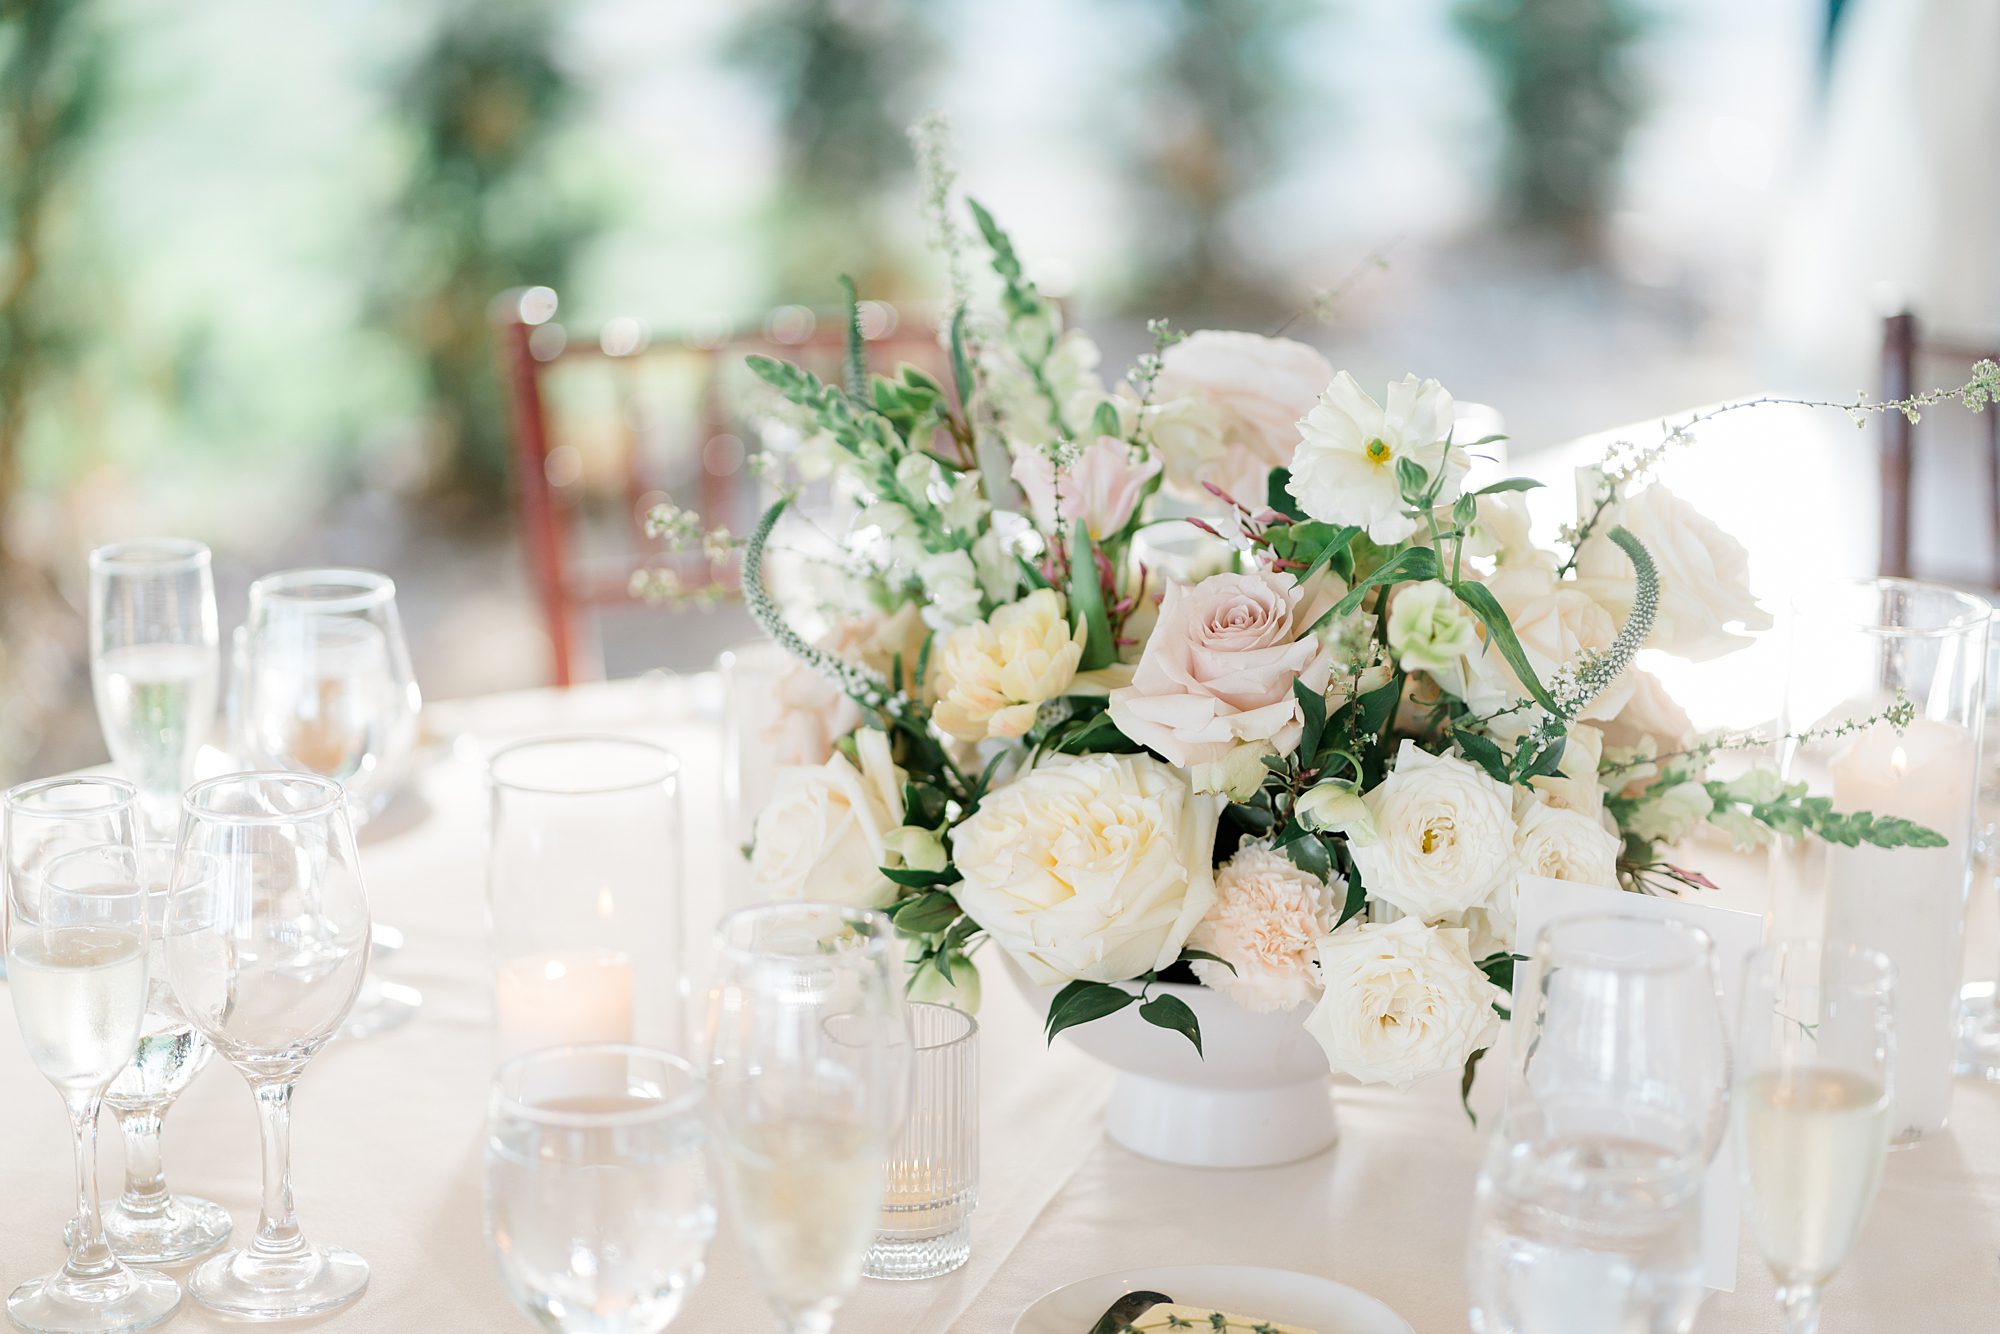 elegant floral centerpieces in white and light pink